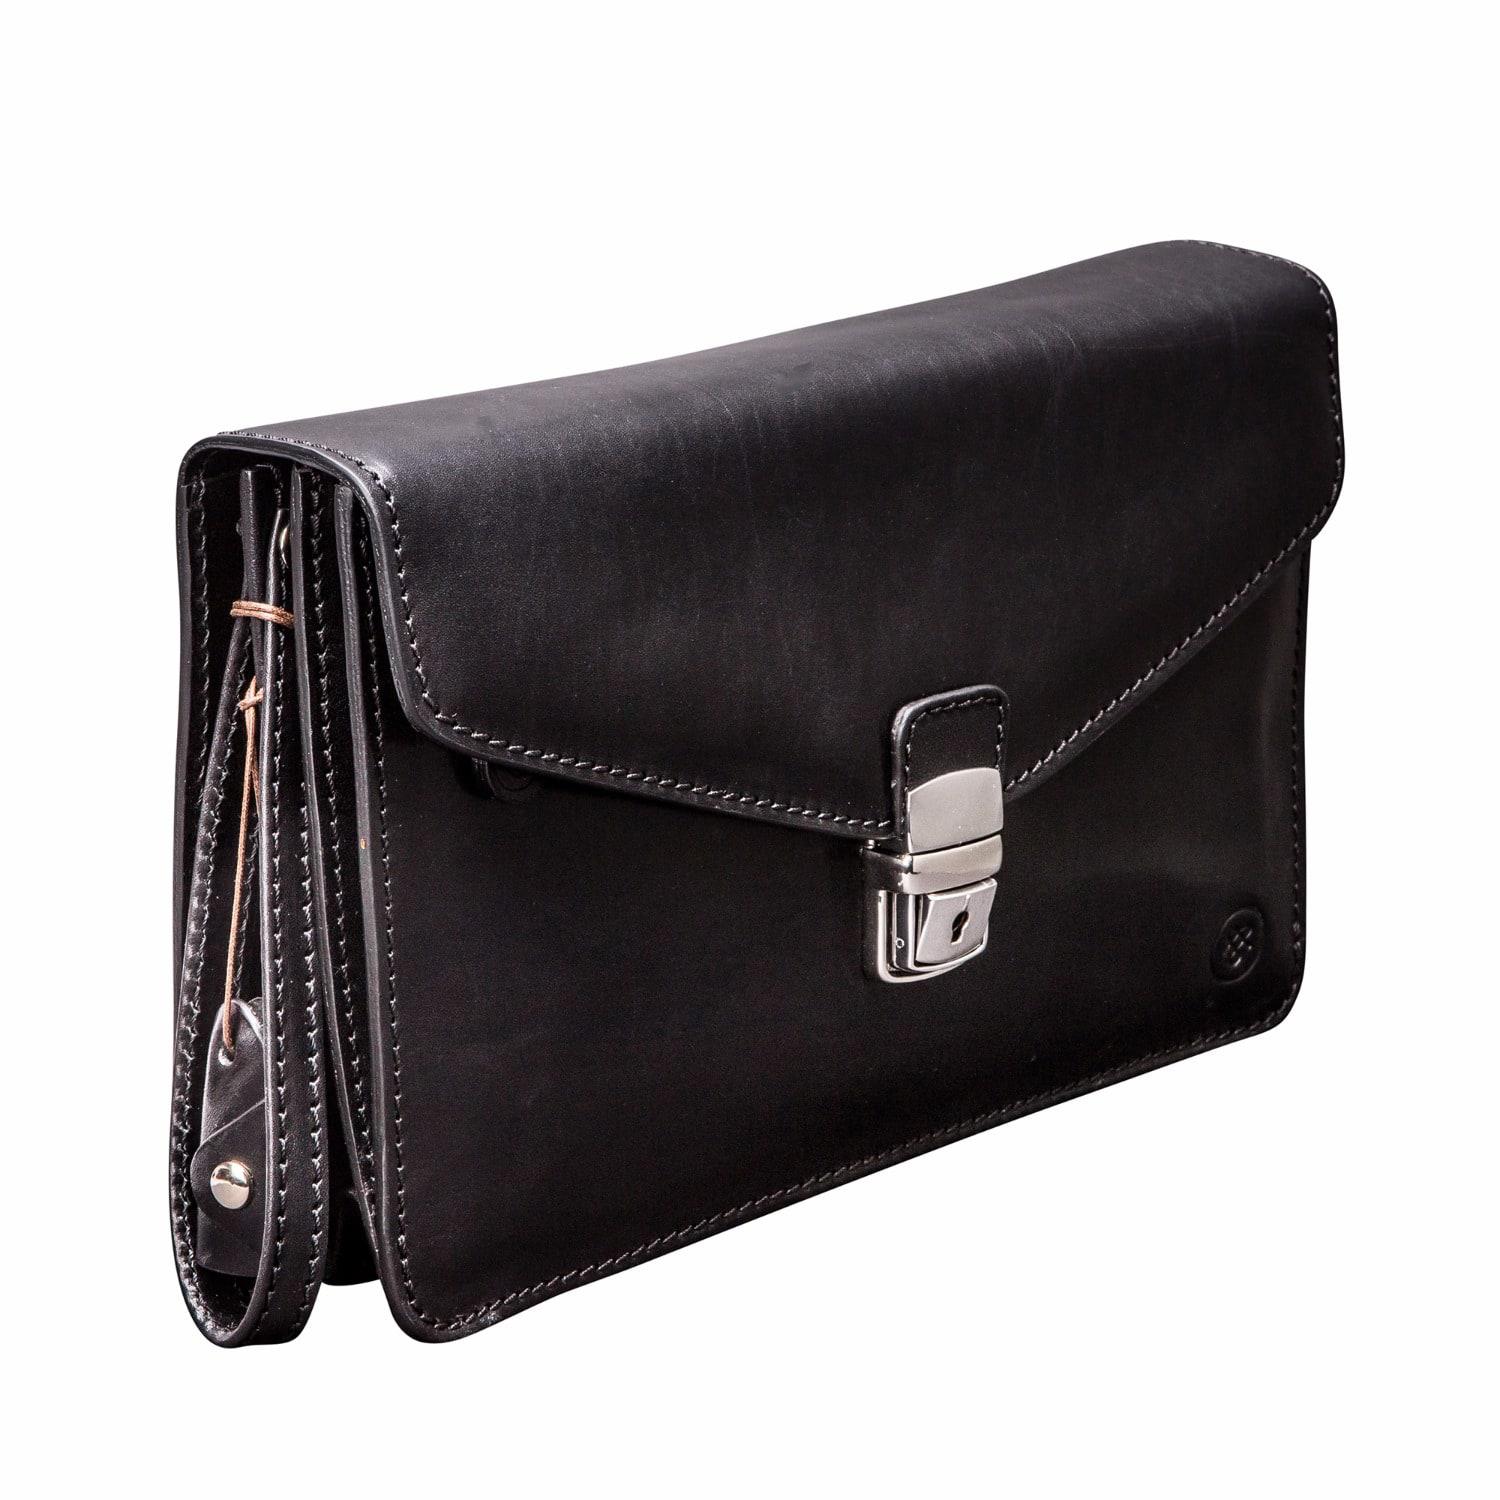 Lyst - Maxwell Scott Bags The Santino Mens Leather Clutch Bag With Wrist Strap Black in Black ...